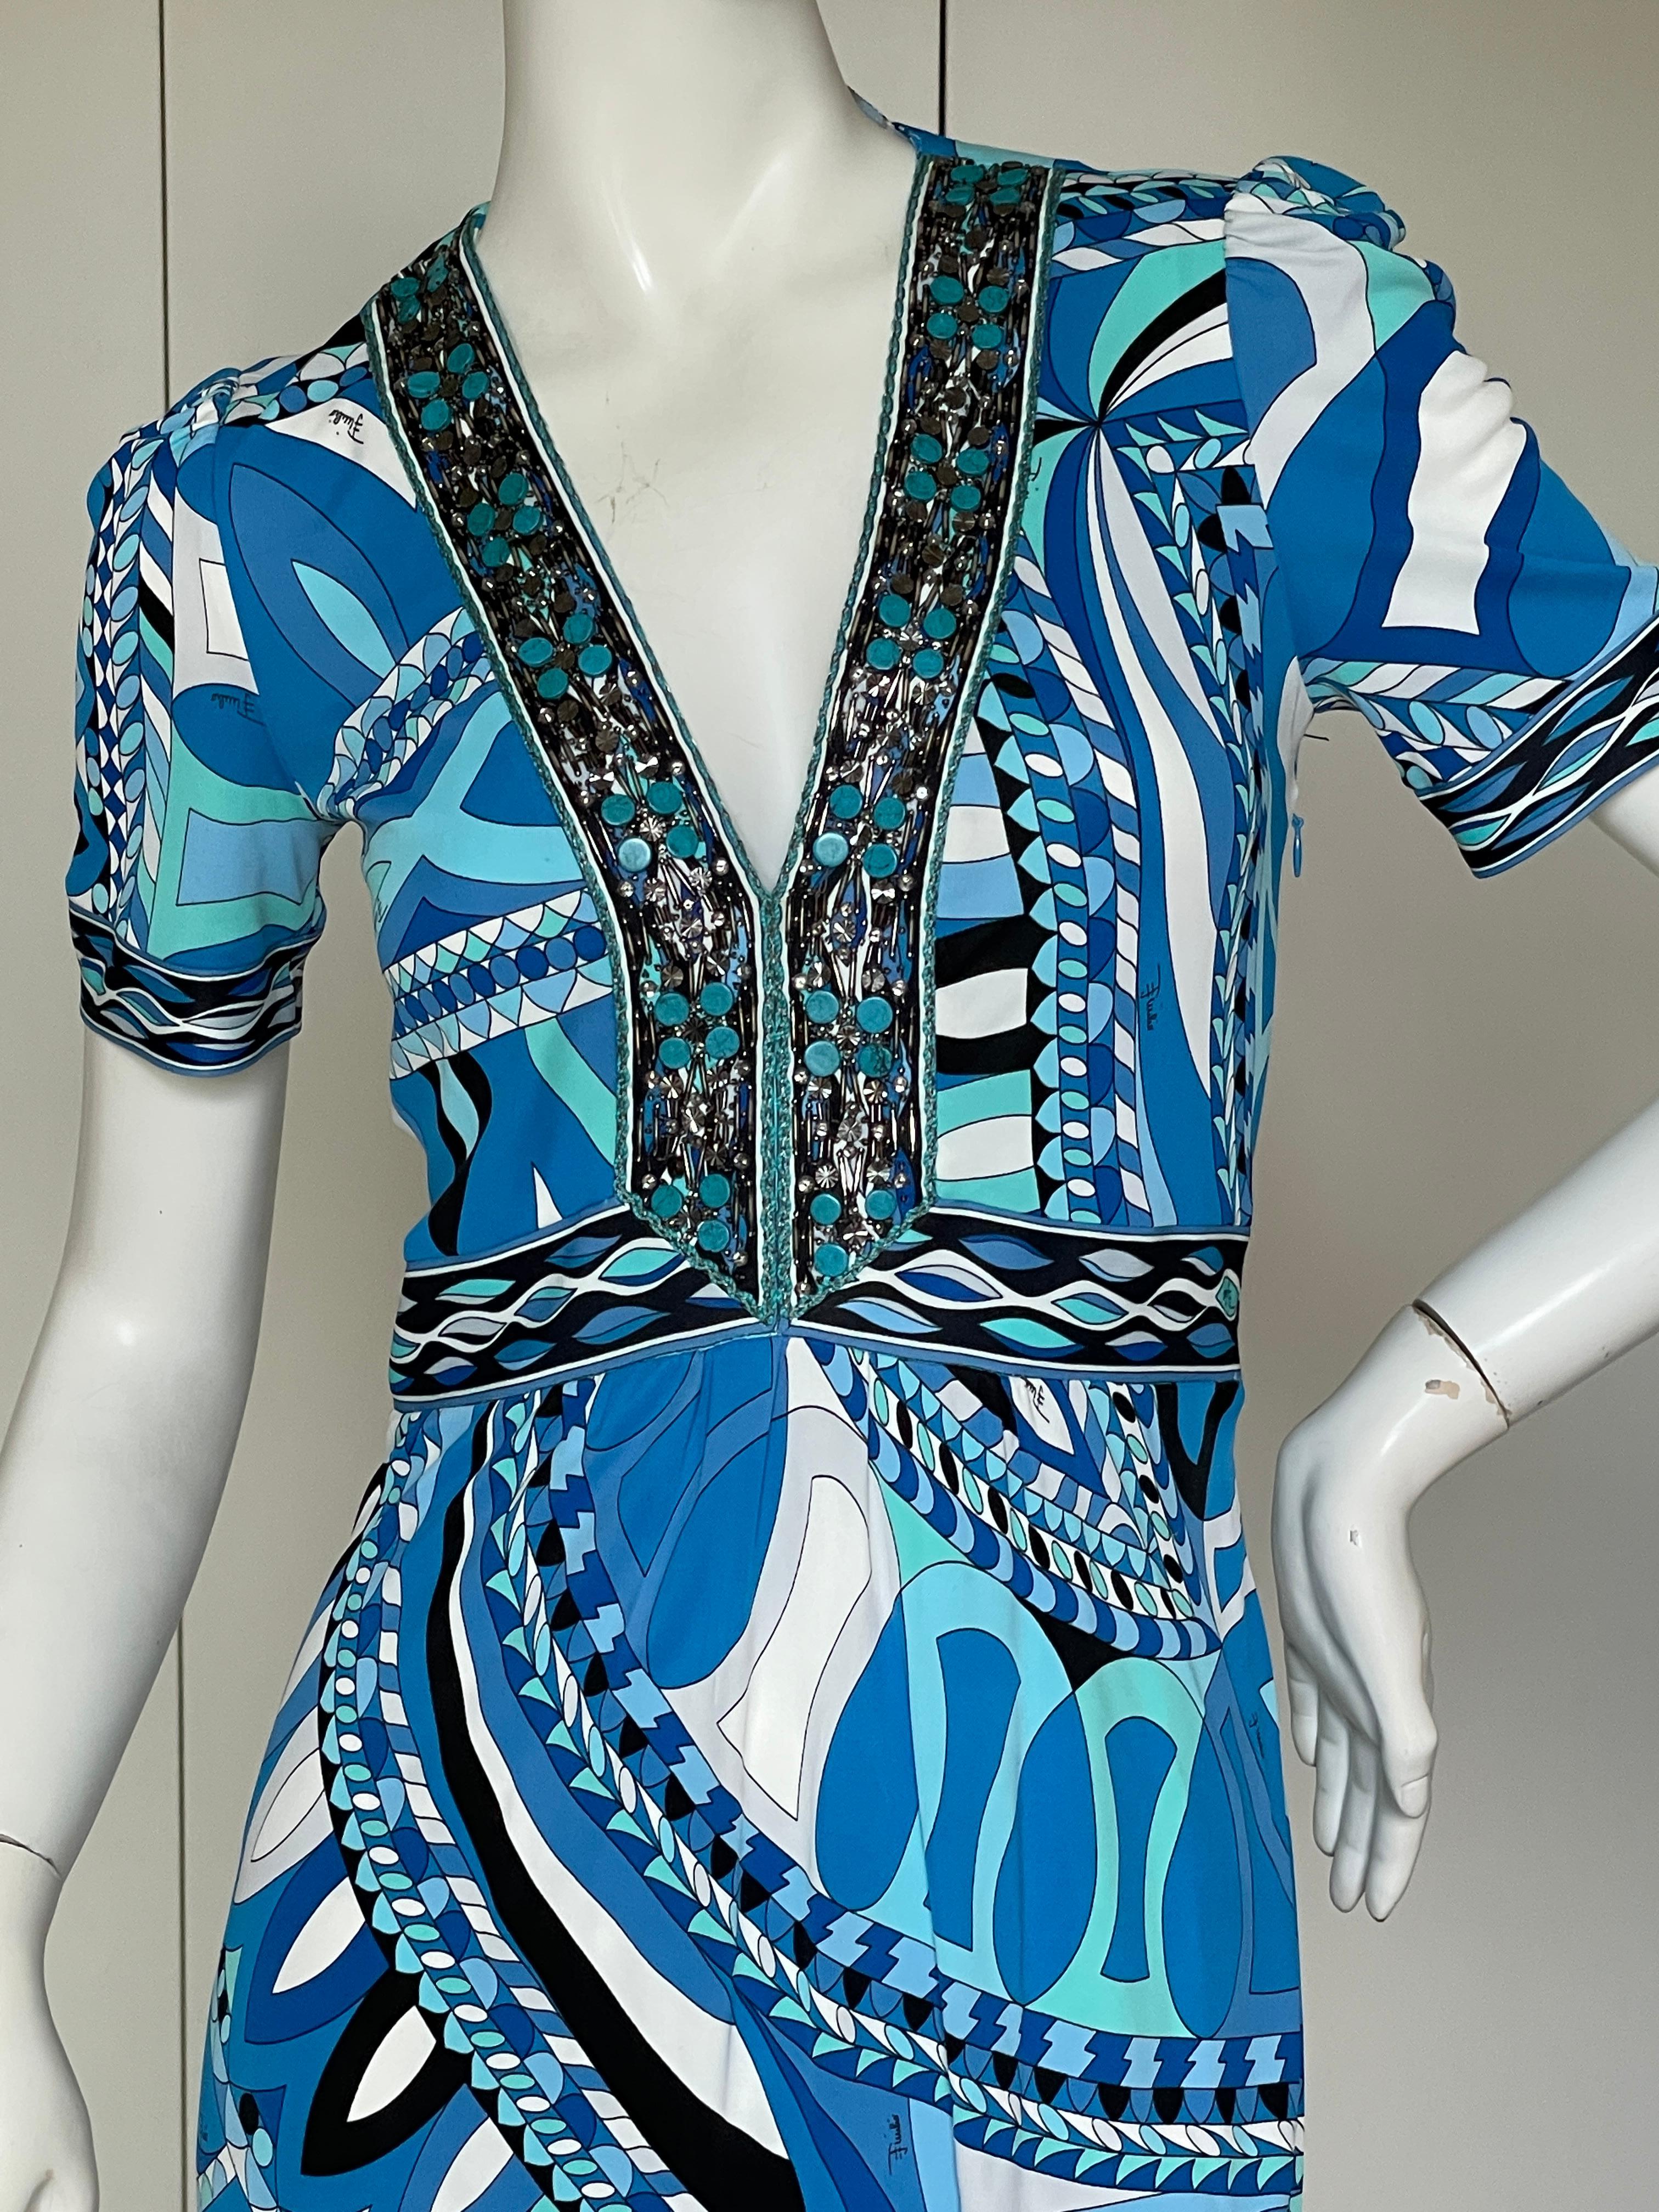 Emilio Pucci Blue Embellished Cocktail Dress from the Lacroix Era  In Excellent Condition For Sale In Cloverdale, CA